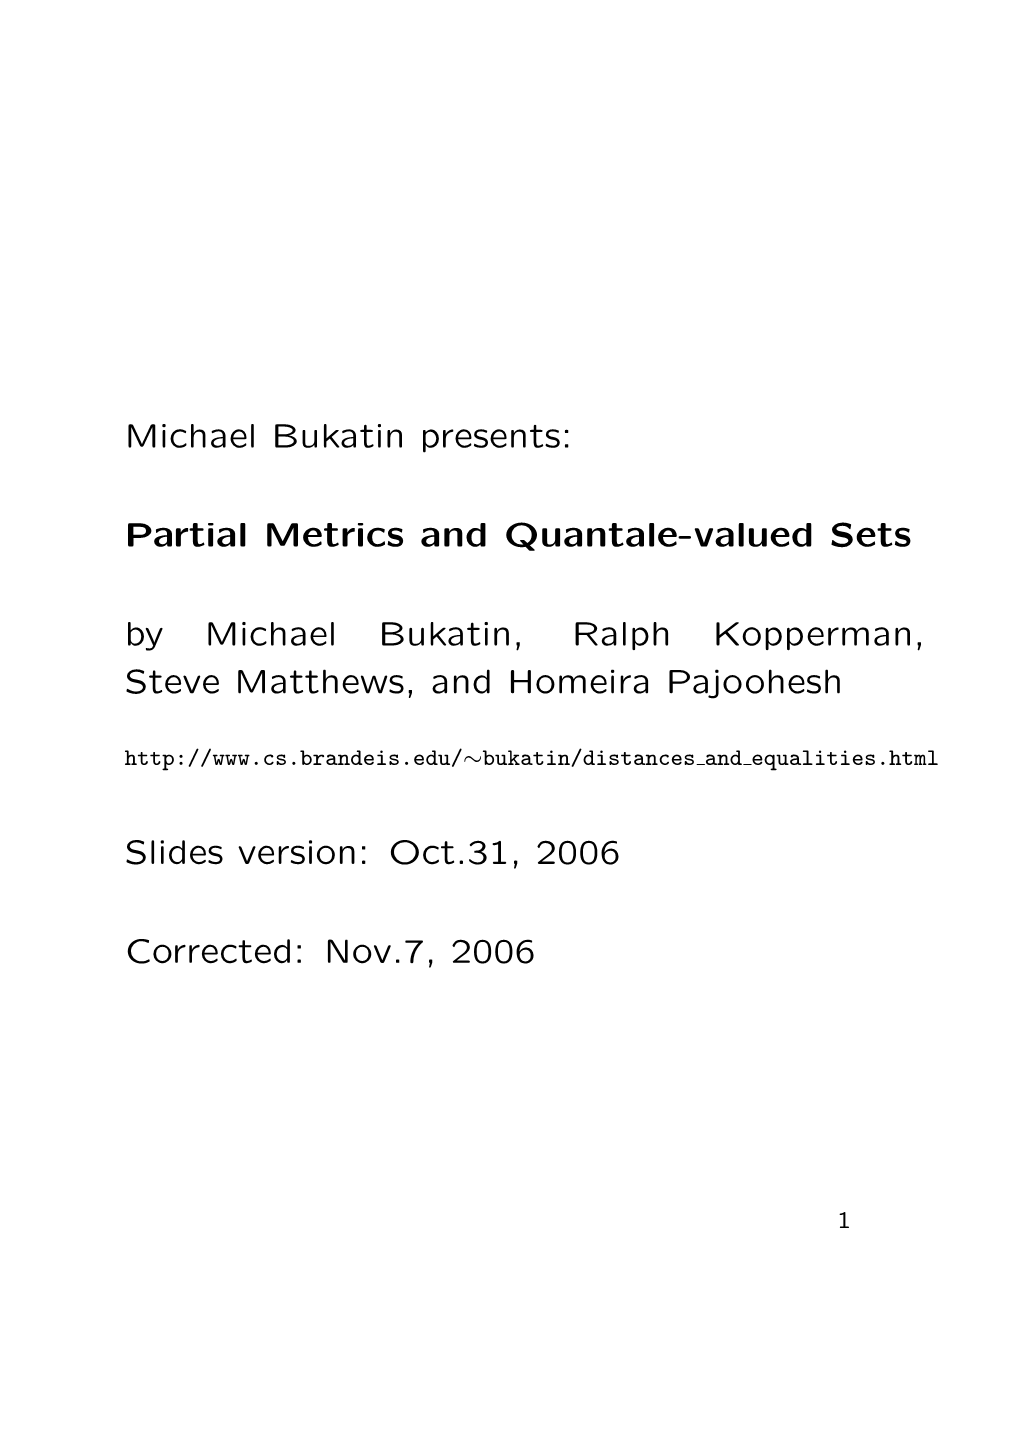 Partial Metrics and Quantale-Valued Sets by Michael Bukatin, Ralph Kopperman, Steve Matthews, and Home